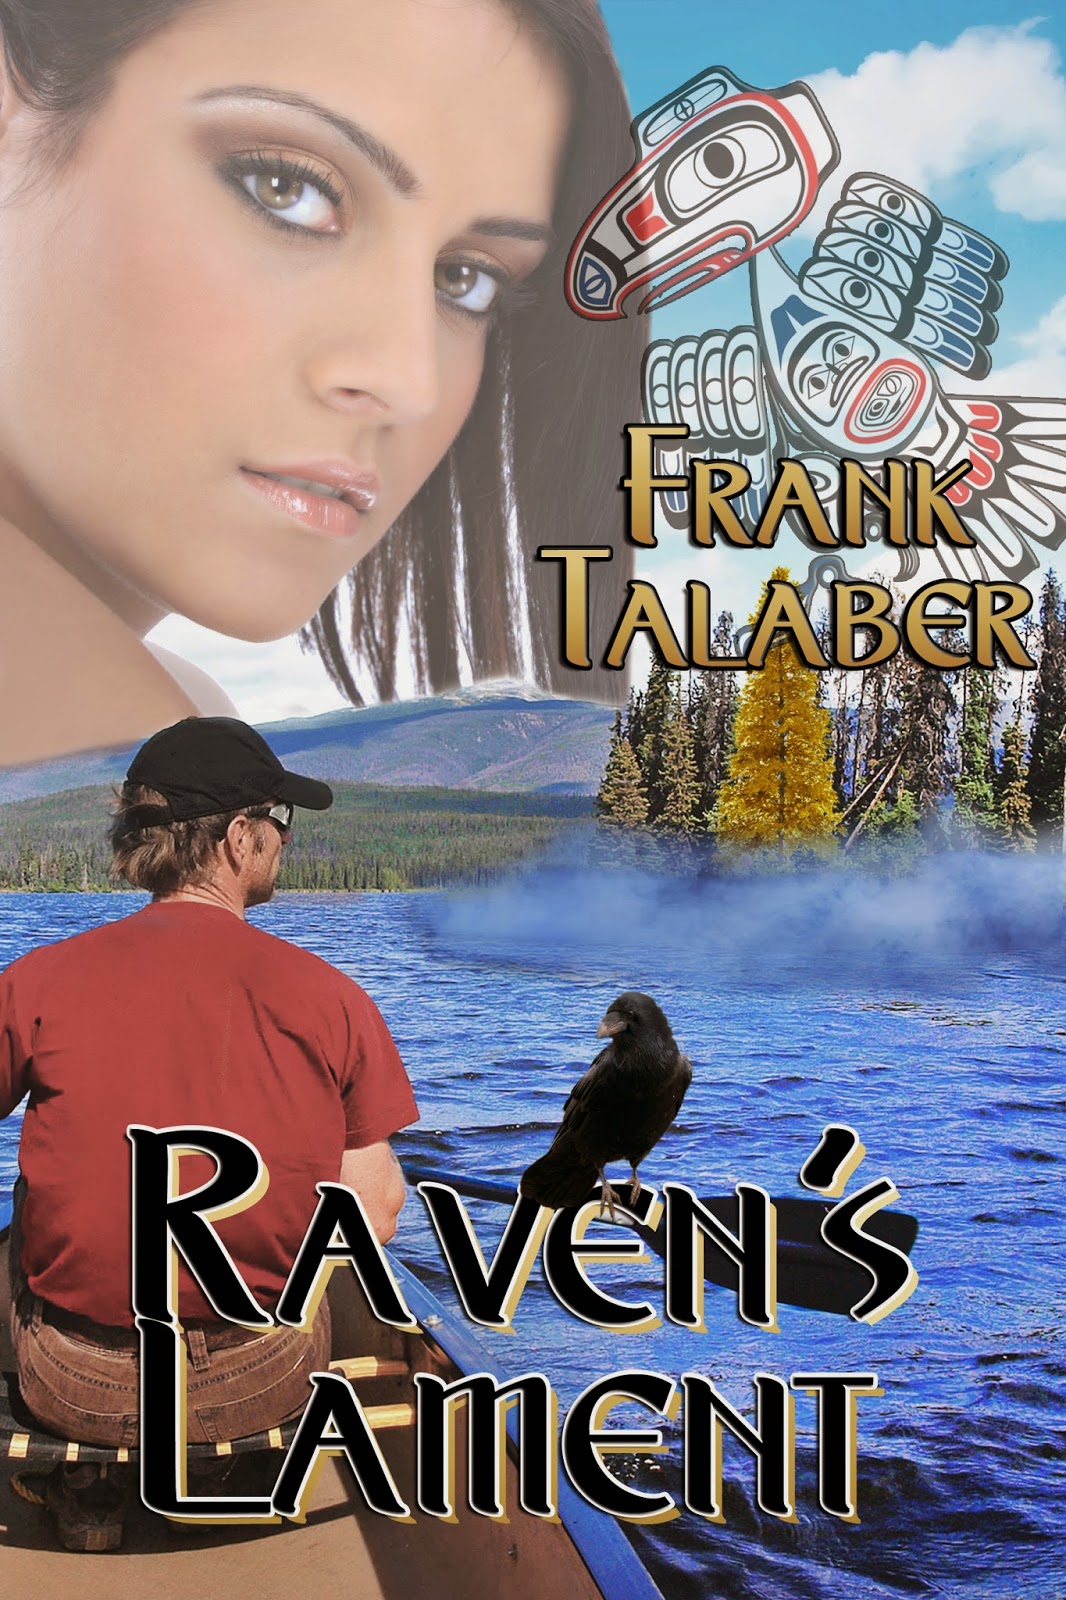  Buy Raven's Lament From Amazon